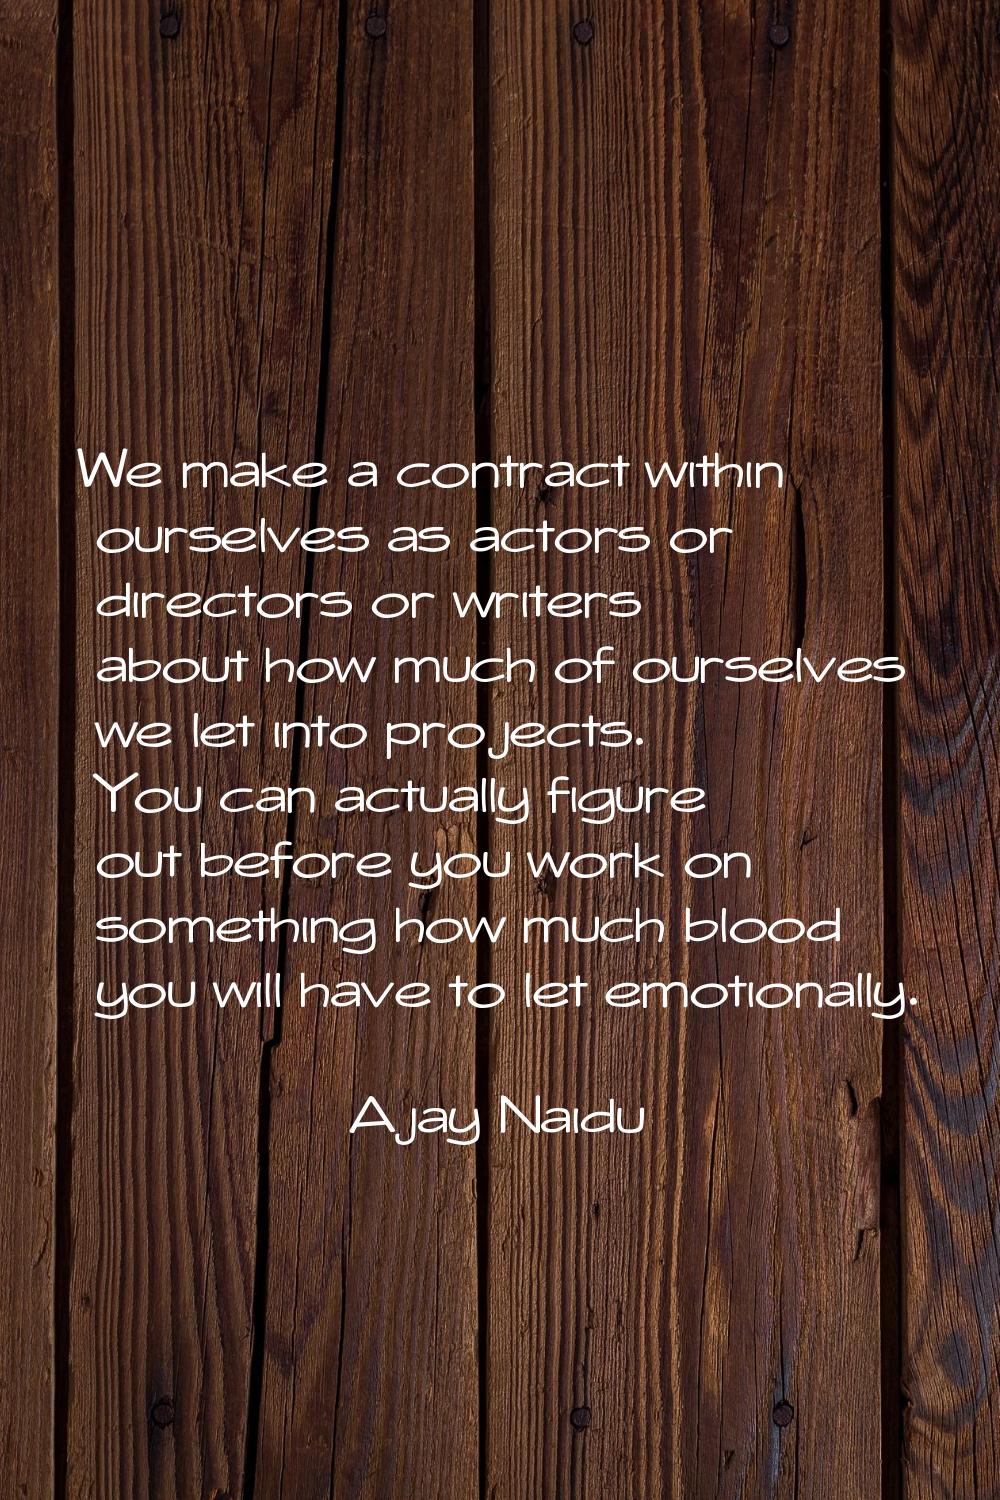 We make a contract within ourselves as actors or directors or writers about how much of ourselves w